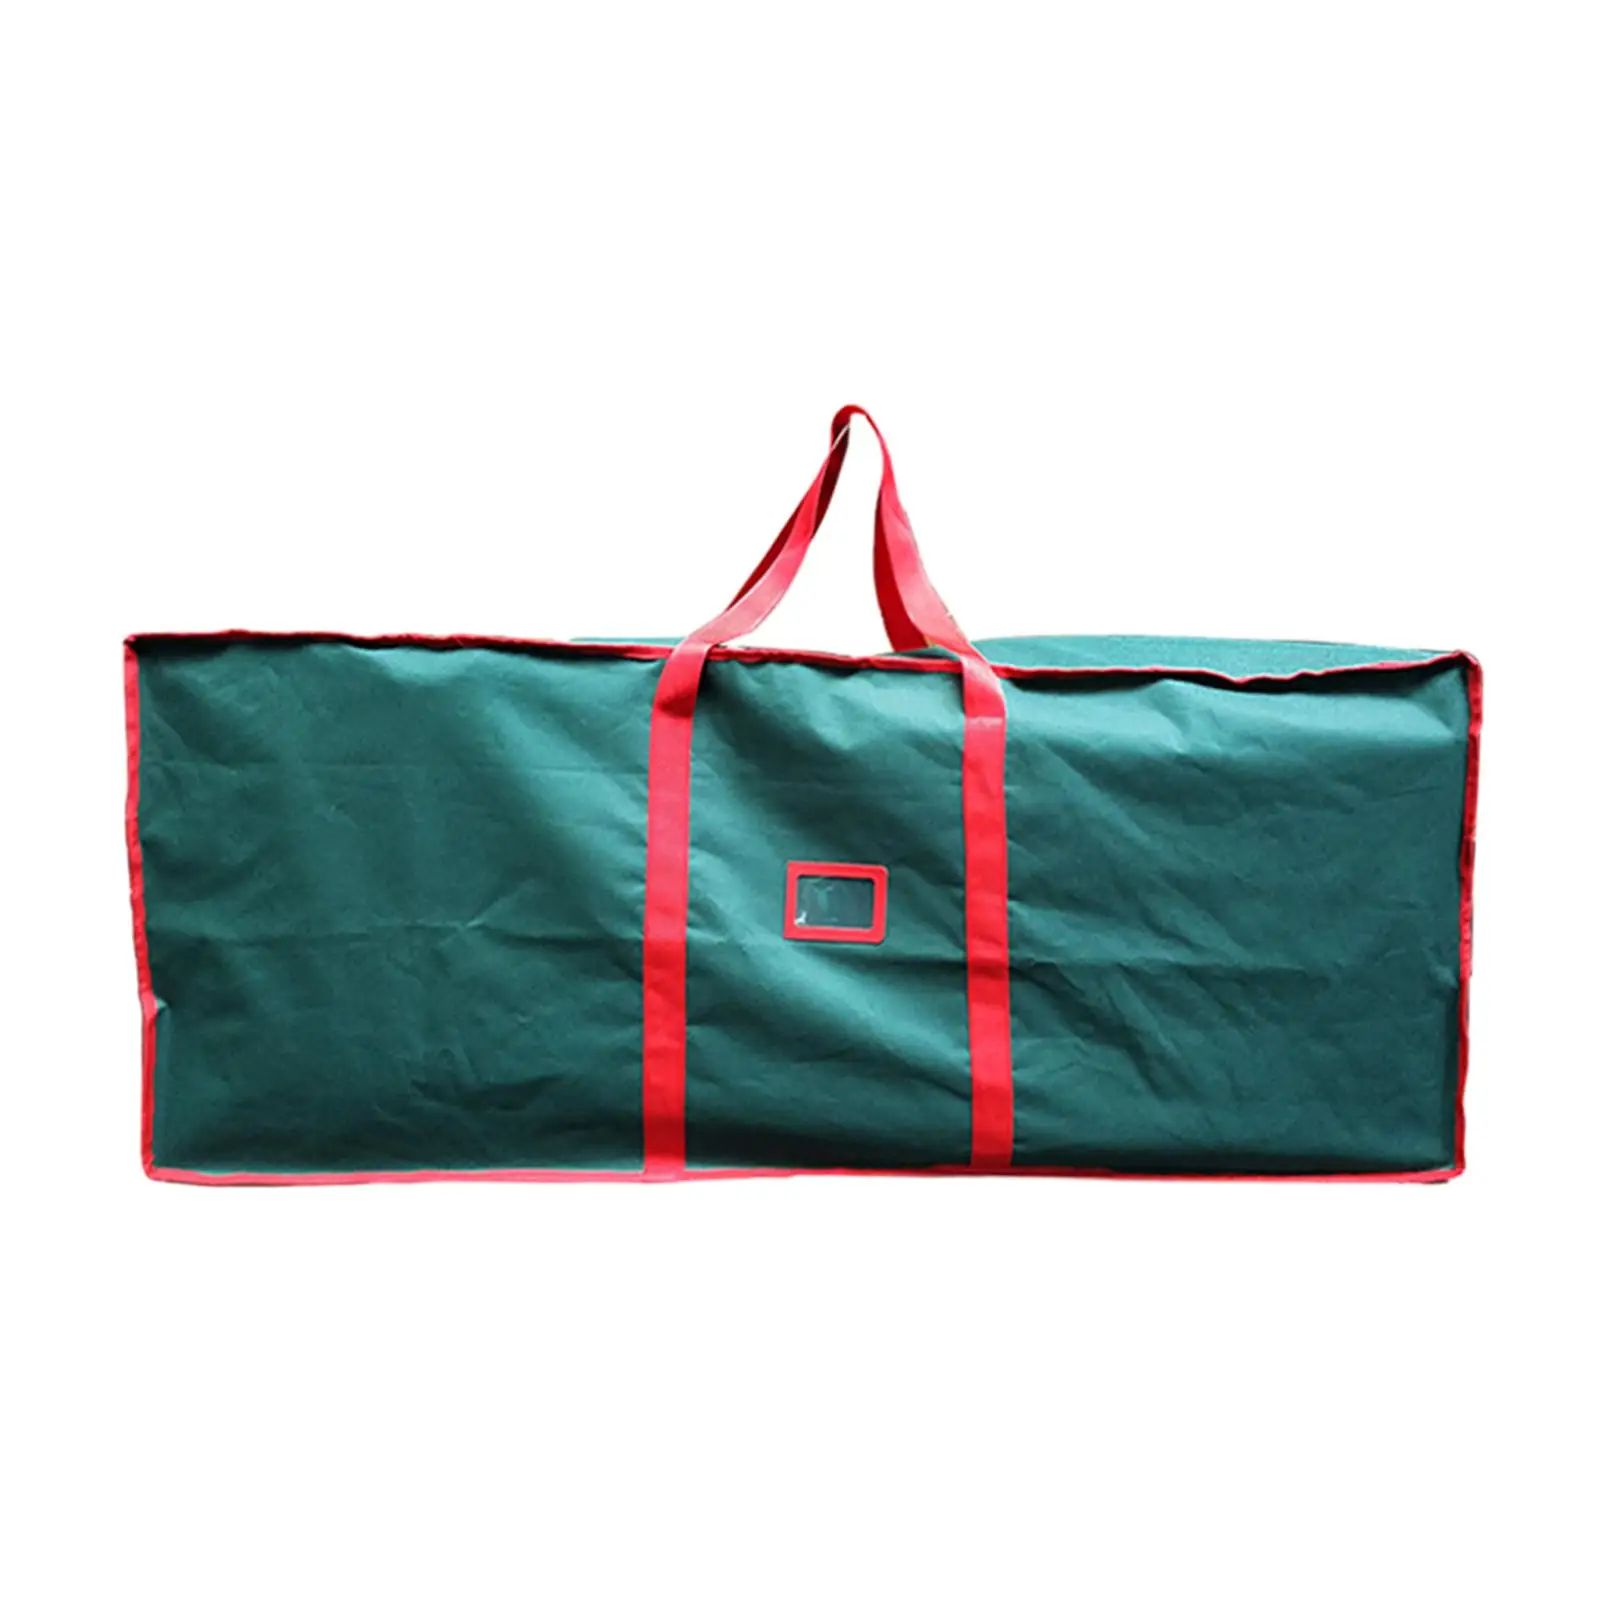 Christmas Tree Storage Bag Pouch Carry Handles Christmas Tree Storage Box